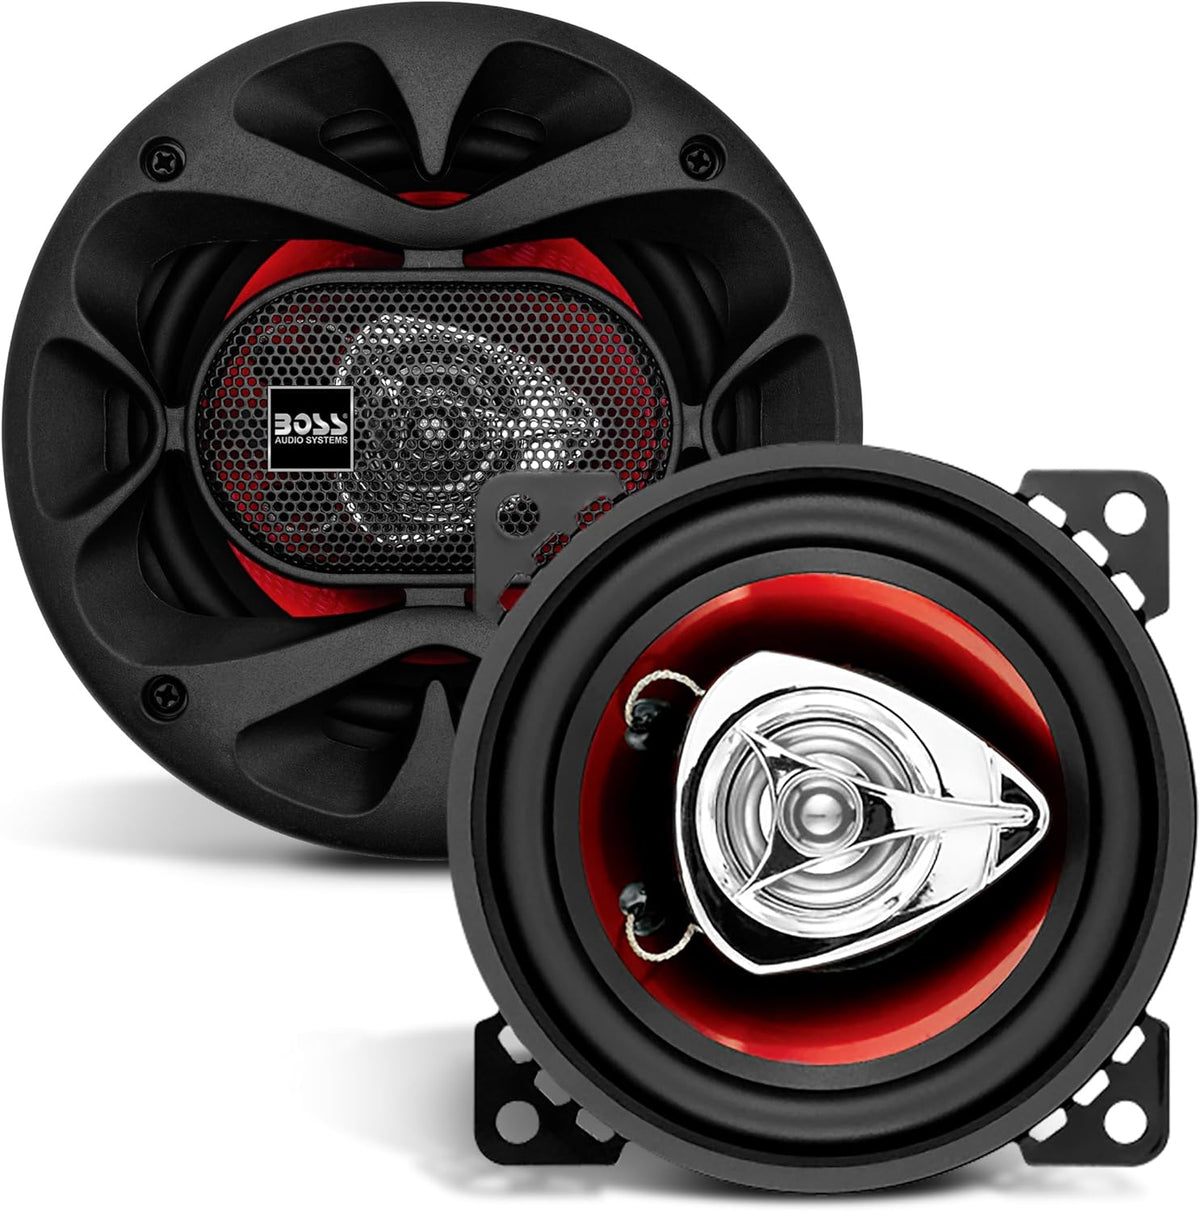 BOSS Audio Systems CH4220 Chaos Series 4 Inch Car Door Speakers - 200 Watts Max (per Pair), Coaxial, 2 Way, Full Range, 4 Ohms, Sold in Pairs, Bocinas para Carro